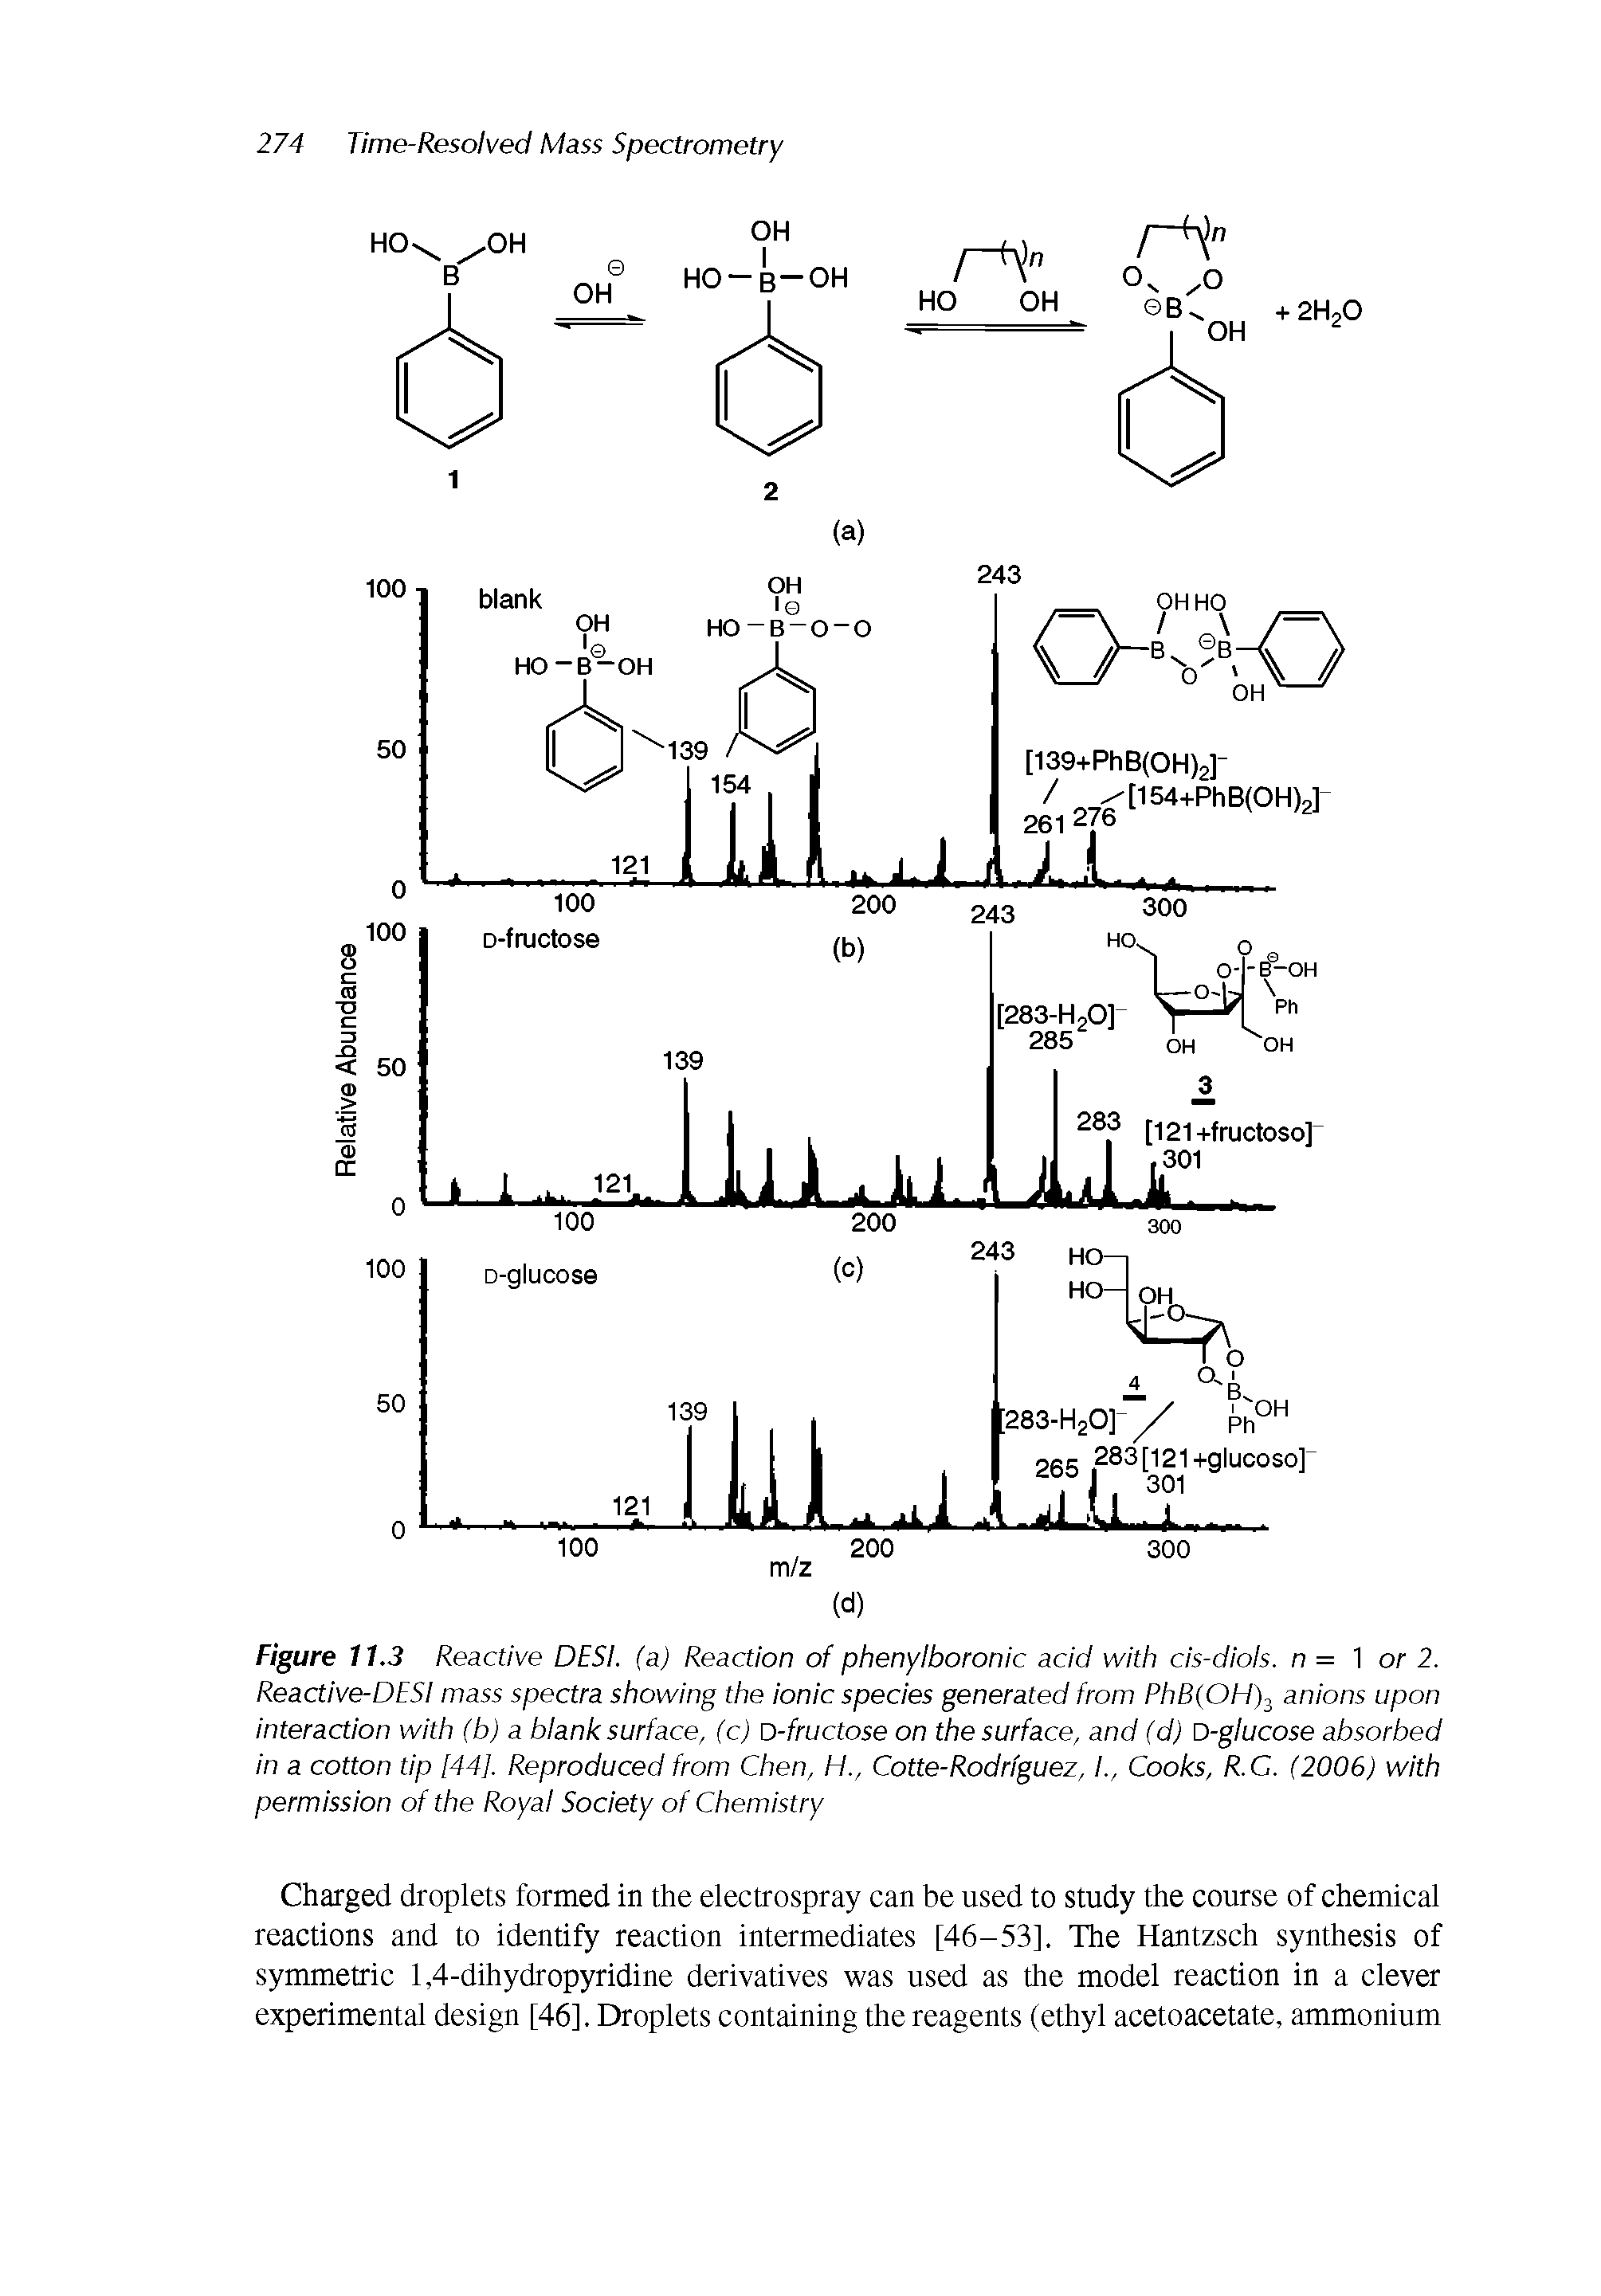 Figure 11.3 Reactive DESI. (a) Reaction of phenylboronic acid with cis-diols. n = 1 or 2. Reactive-DESI mass spectra showing the ionic species generated from PhB(OH) anions upon interaction with (bj a blank surface, (c) D-fructose on the surface, and (d) D-glucose absorbed in a cotton tip [44], Reproduced from Chen, H., Cotte-Rodrfguez, I., Cooks, R.C. (2006) with permission of the Royal Society of Chemistry...